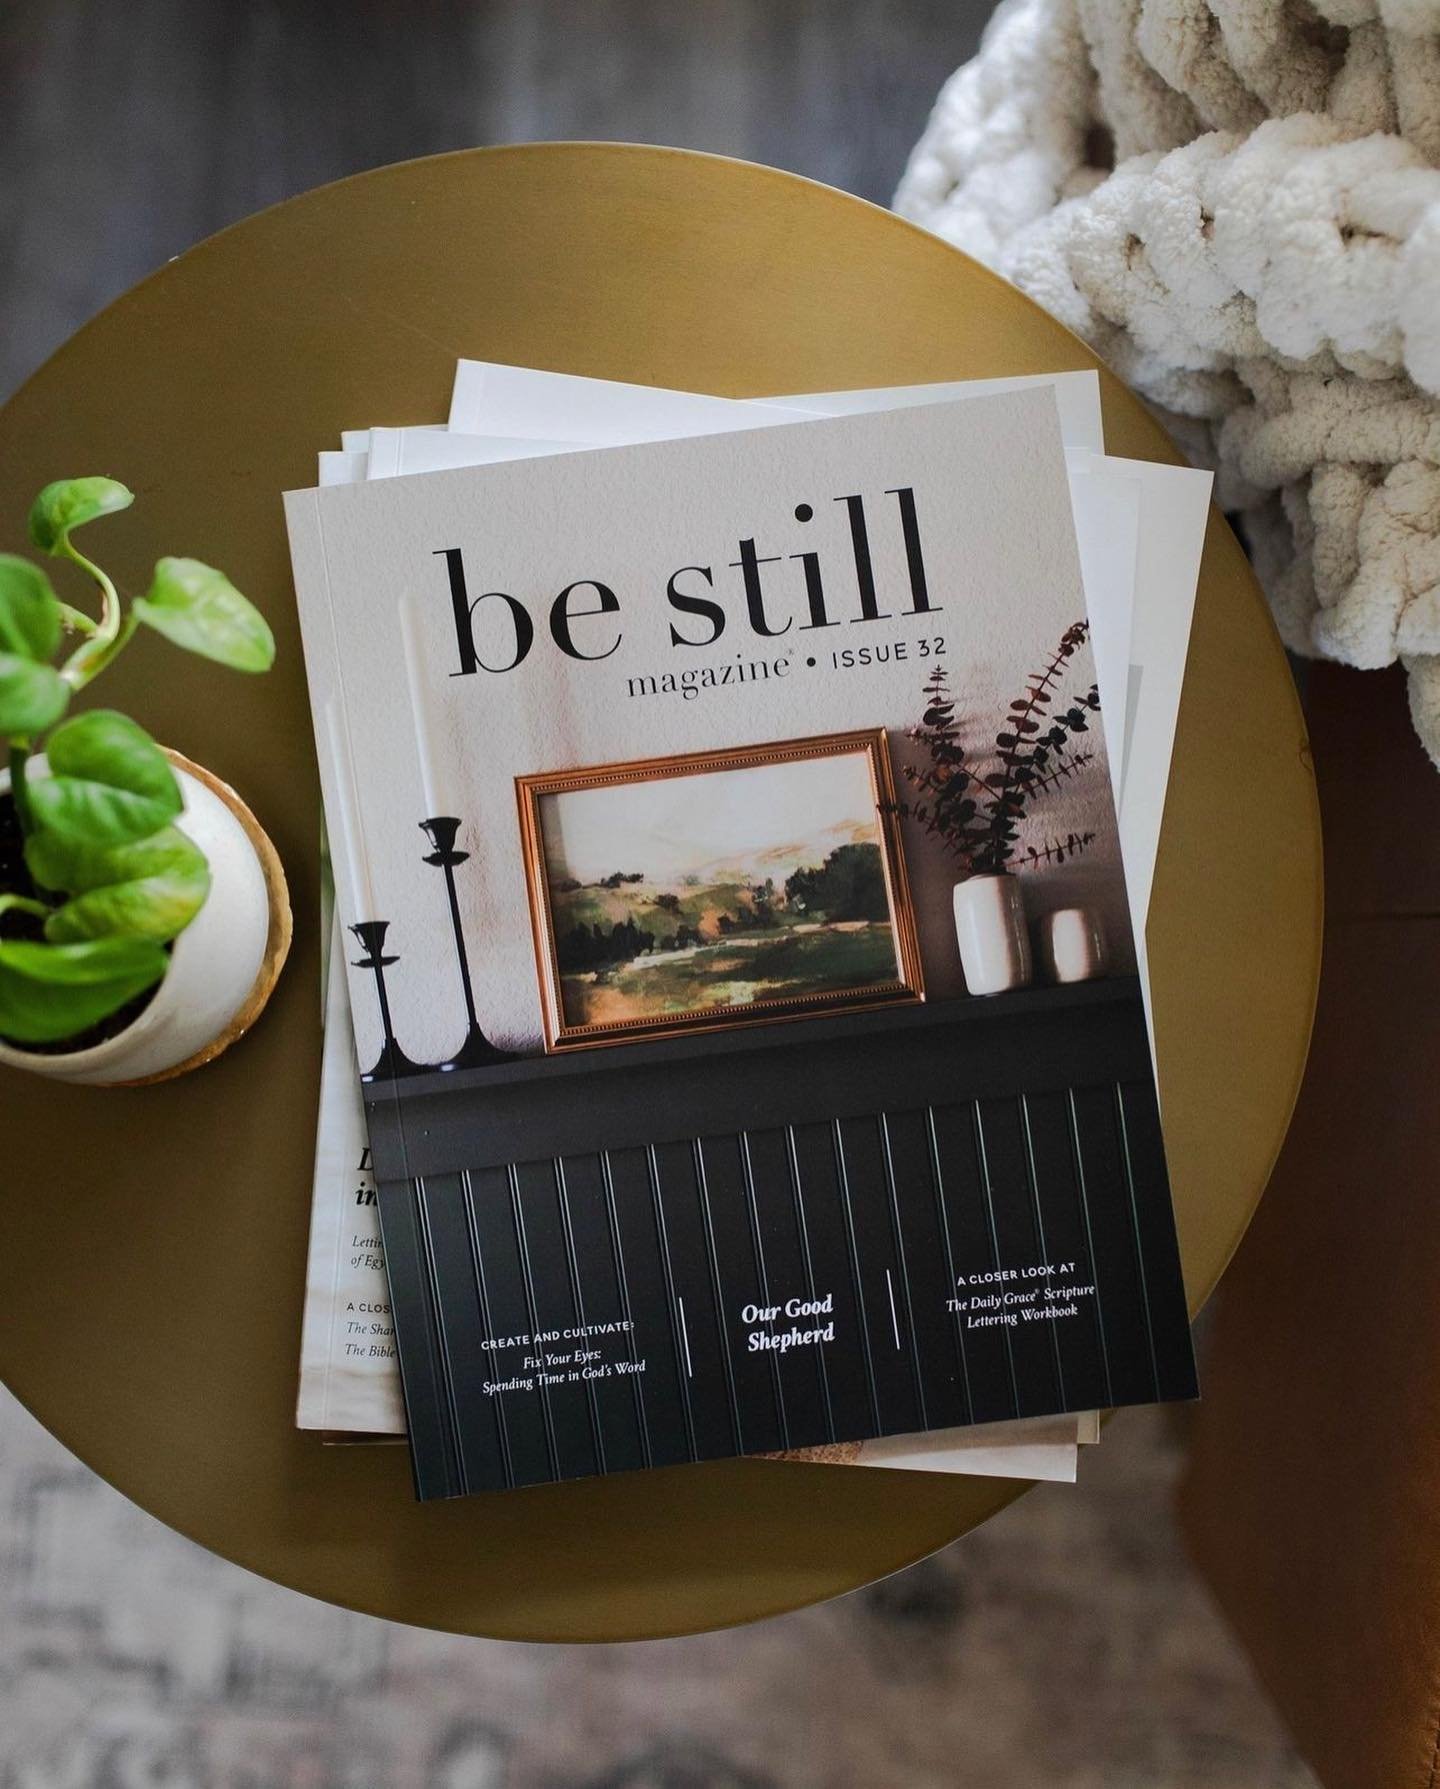 I&rsquo;m honored to have an article published in The Daily Grace Co.: Be Still Magazine, Spring 2024. 

&ldquo;An Unexpected Encounter: Finding God&rsquo;s Presence in Unmet Expectations&rdquo; came out of a difficult season. But through that, God g